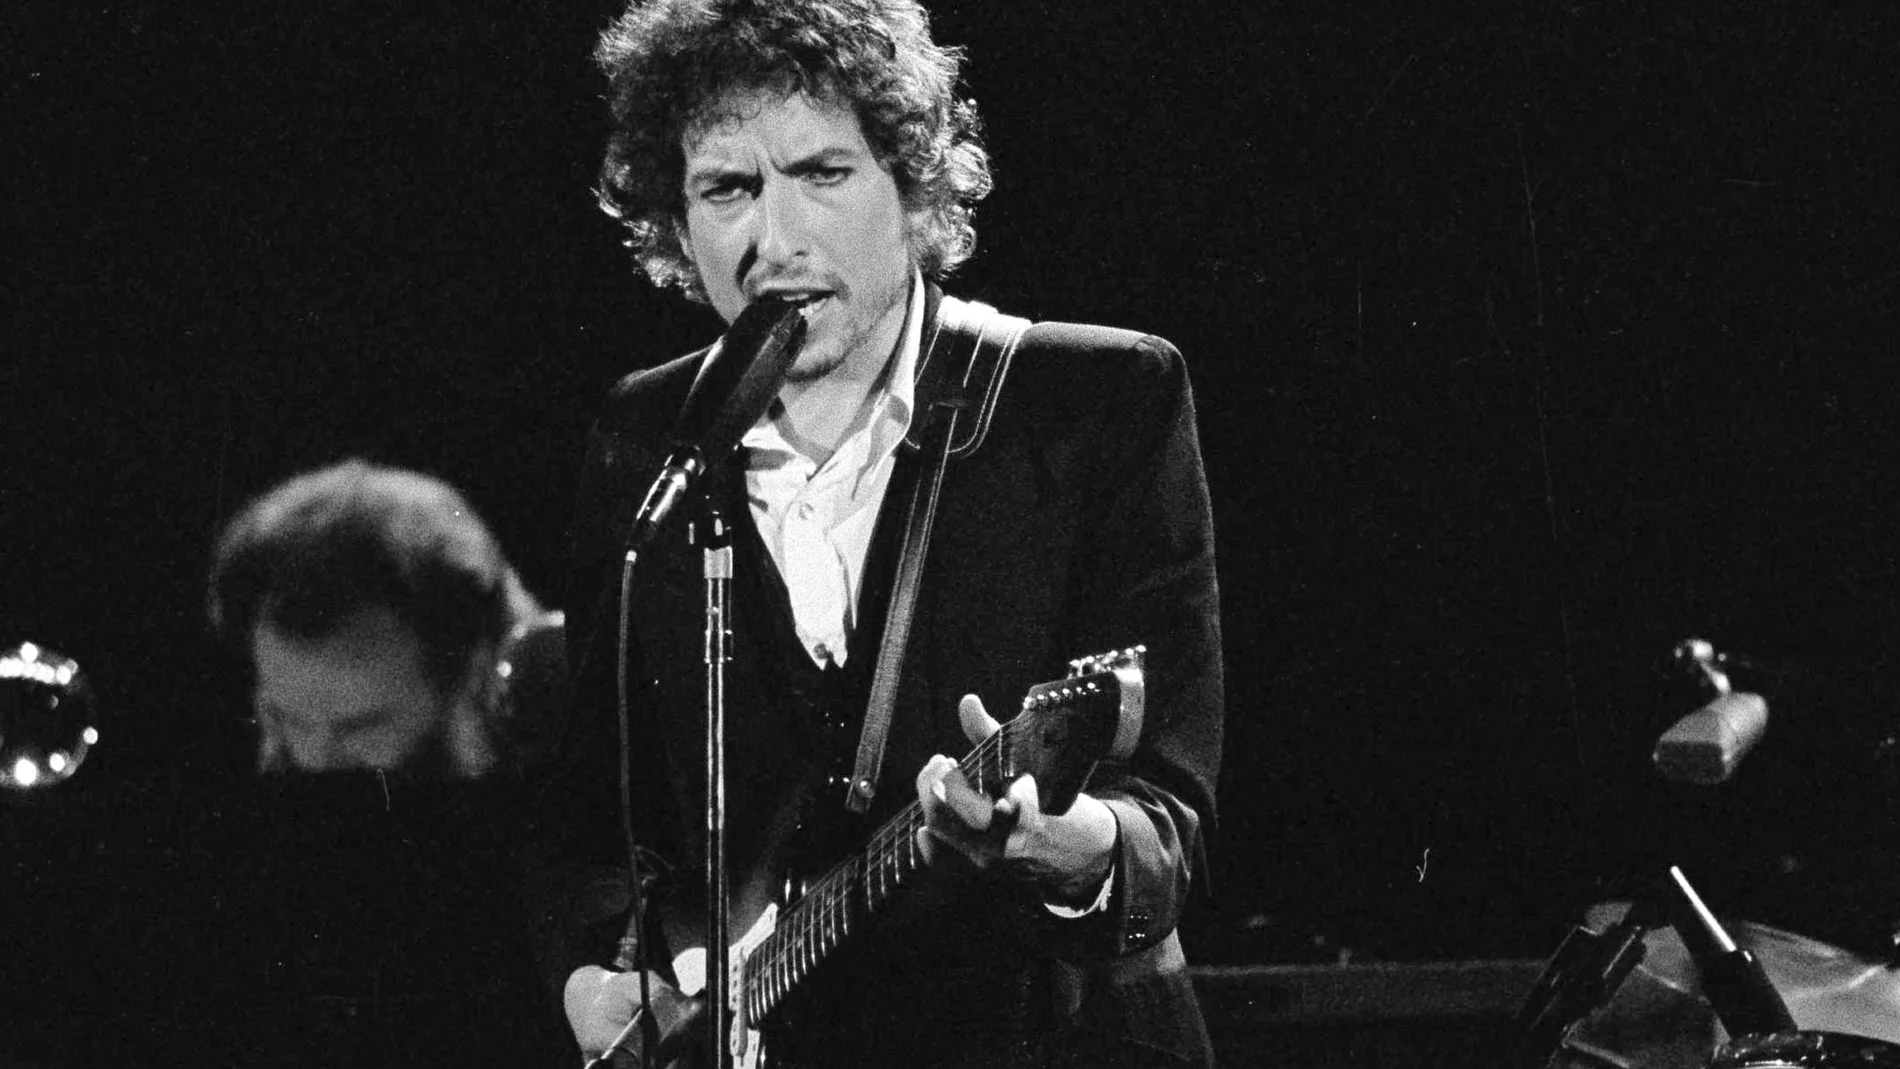 FILE - Musician Bob Dylan performs with The Band at the Forum in Los Angeles on Feb. 15, 1974. Transcripts of lost 1971 Dylan interviews with the late American blues artist Tony Glover and letters the two exchanged reveal that Dylan changed his name from Robert Zimmerman because he worried about anti-Semitism, and that he wrote "Lay Lady Lay" for actress Barbra Streisand. The items are among a trove of Dylan archives being auctioned in November 2020 by Boston-based R.R. Auction. (AP Photo/Jeff Robbins, File)